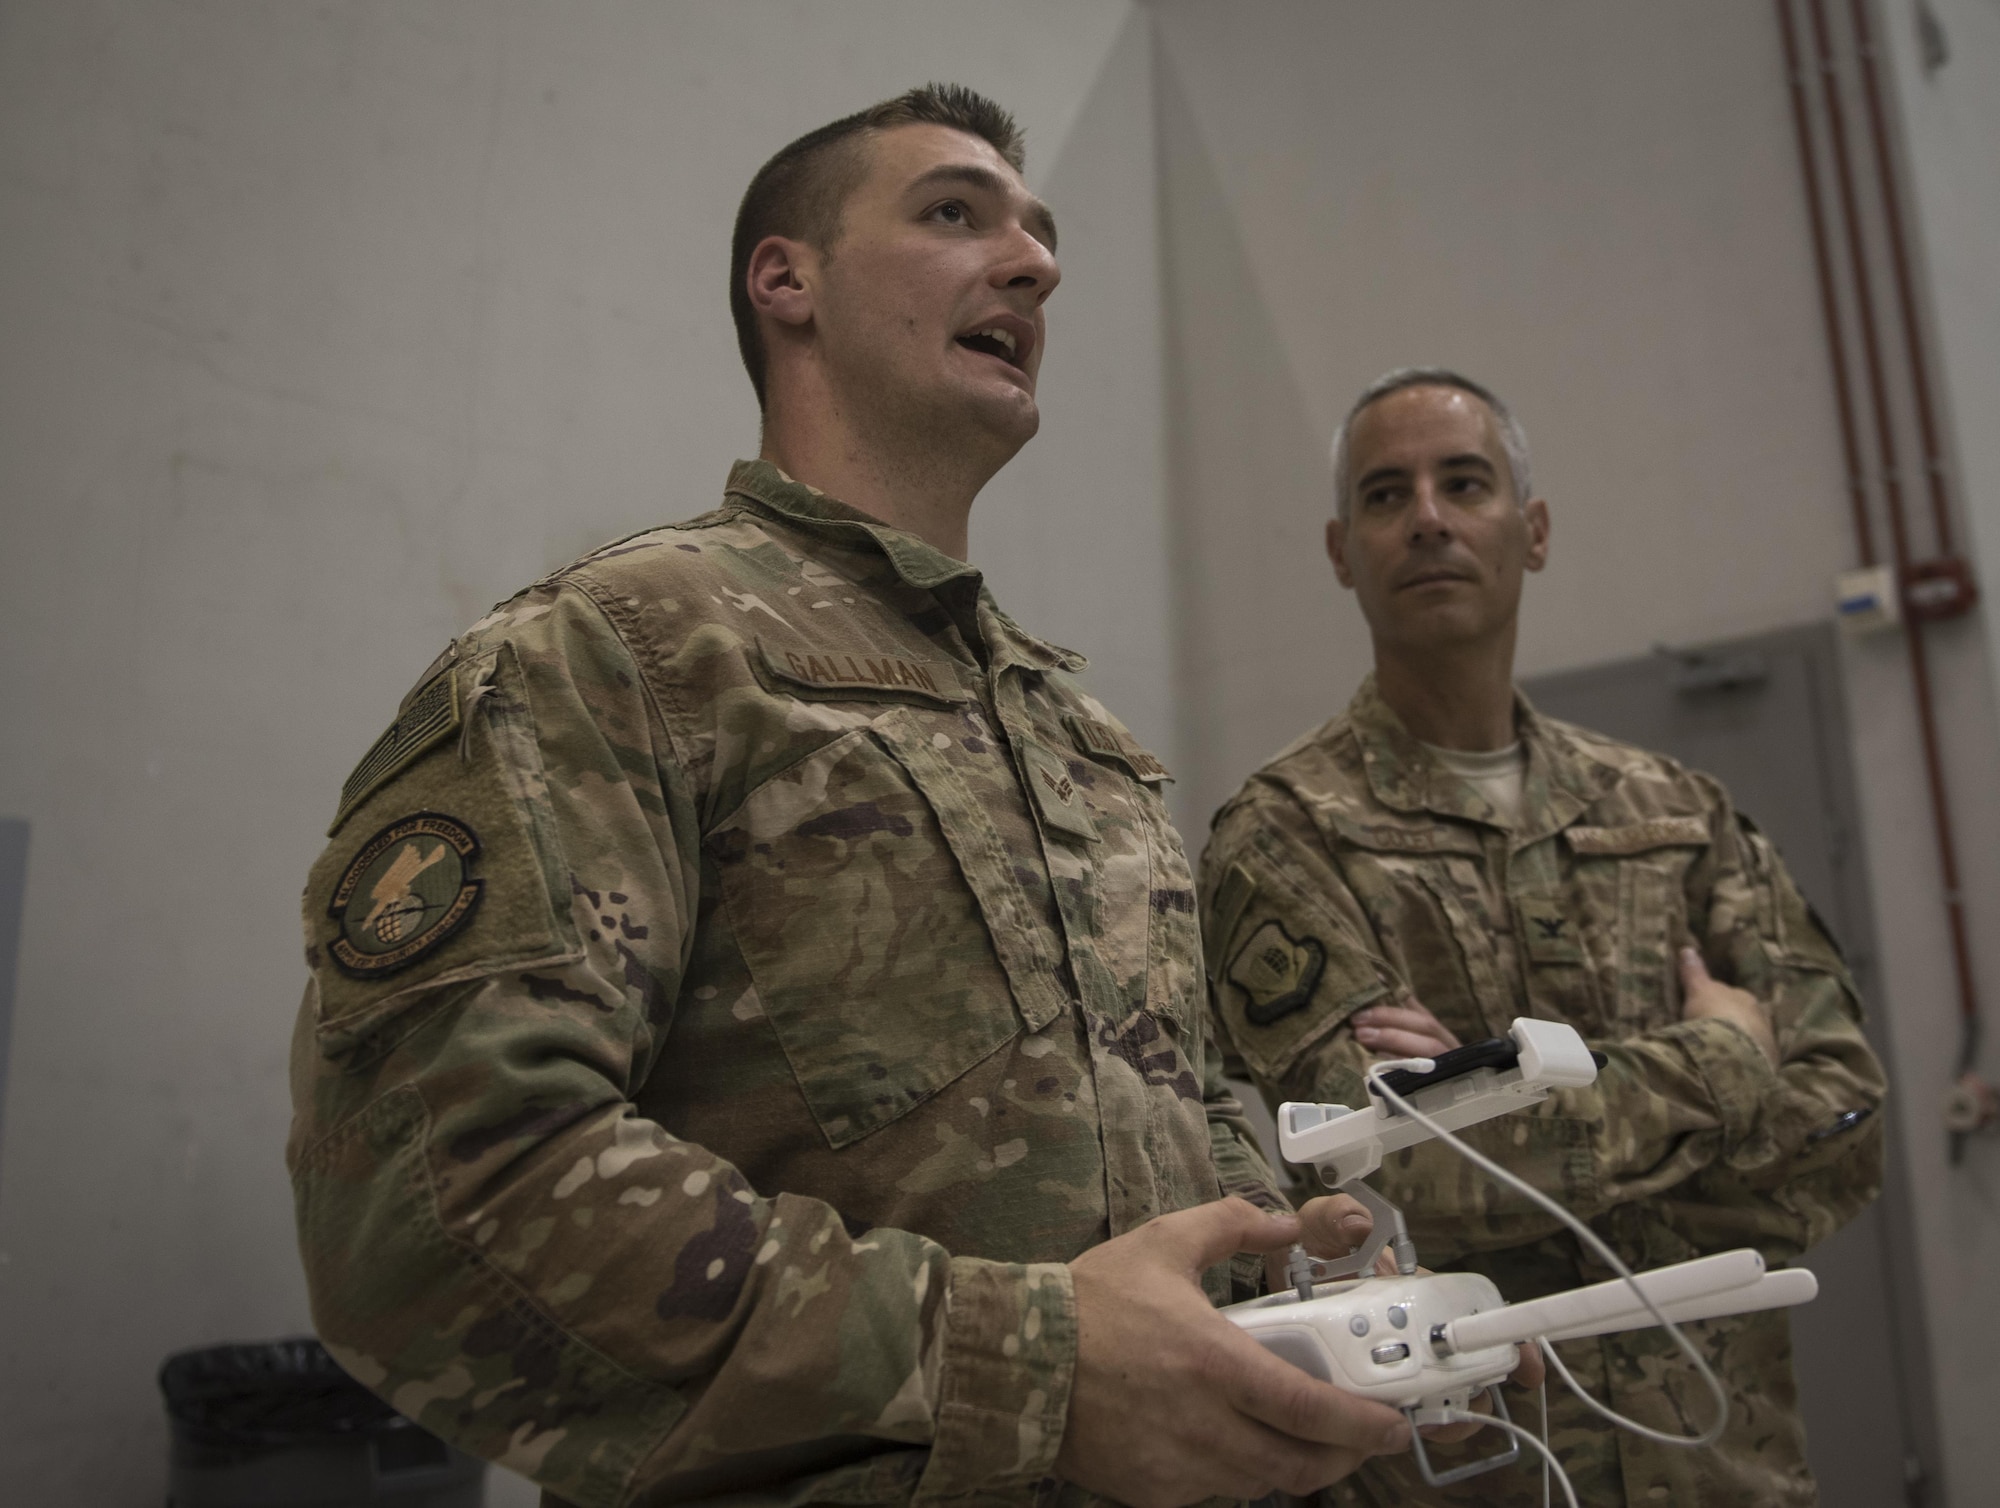 Senior Airman Christopher Gallman, 455th Expeditionary Security Forces Squadron joint defense operations center, speaks to Col. Bradford Coley, the 455th Expeditionary Mission Support Group commander, about the unmanned aircraft systems program during a live-demonstration at Bagram Airfield, Afghanistan, June 30, 2017. The 455th ESFS teamed up with a researcher from the Air Force Research Lab to teach Airmen how to pilot drones and use them to train coalition partners on how to react to them on the battlefield. (U.S. Air Force photo by Staff Sgt. Benjamin Gonsier) 